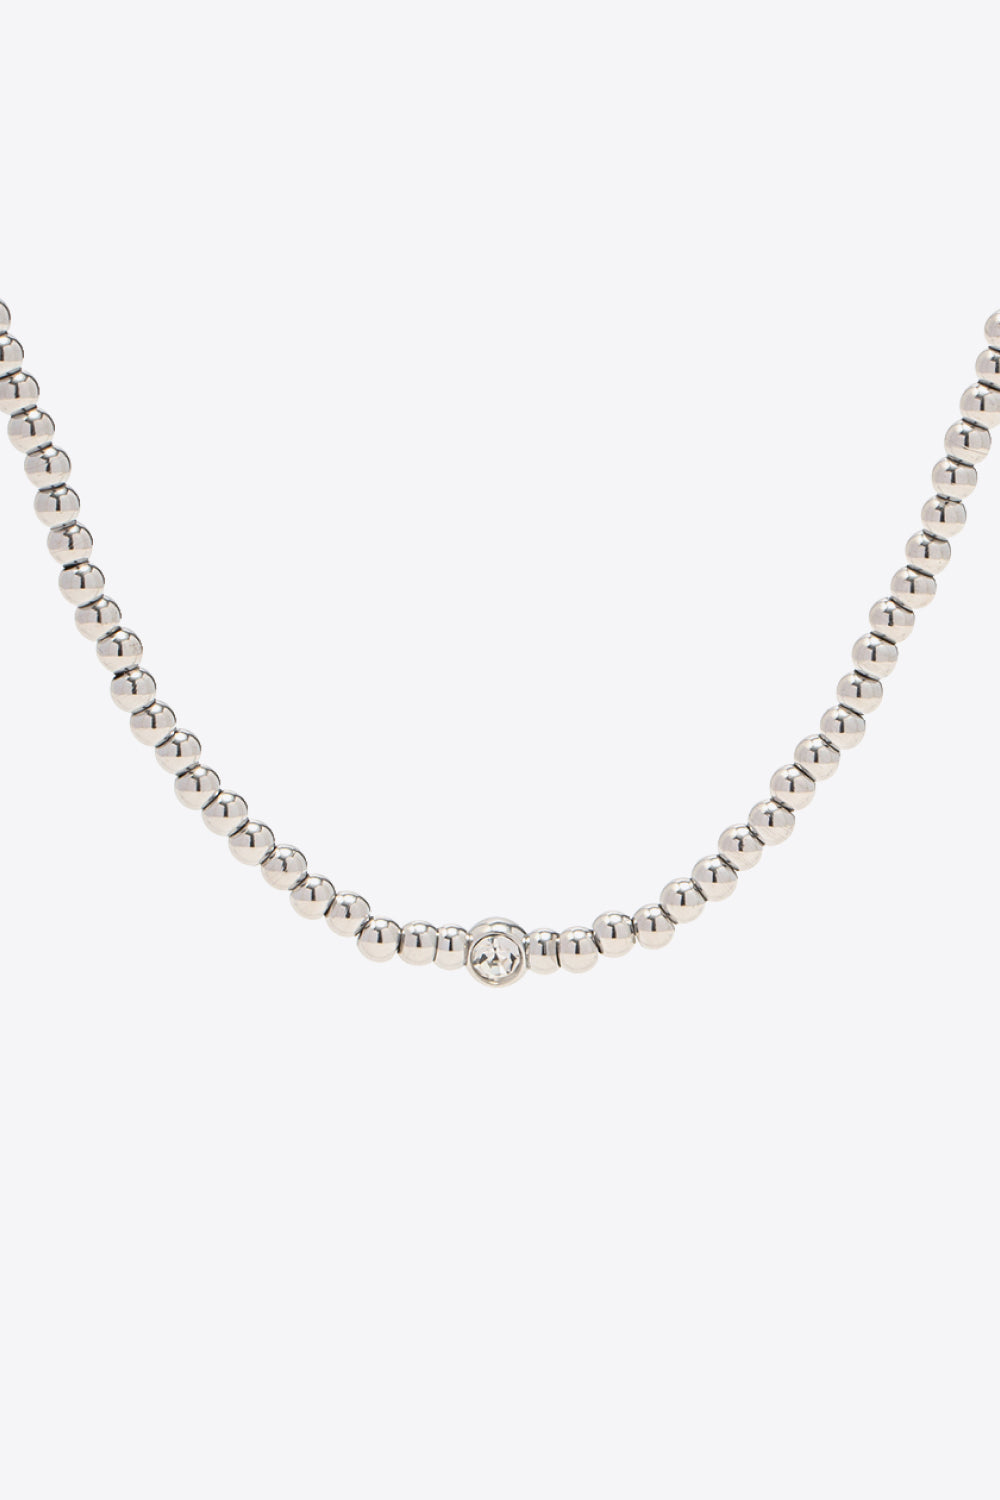 Modern Stainless Steel Necklace: A contemporary and sleek necklace crafted from stainless steel, perfect for a stylish and durable accessory.